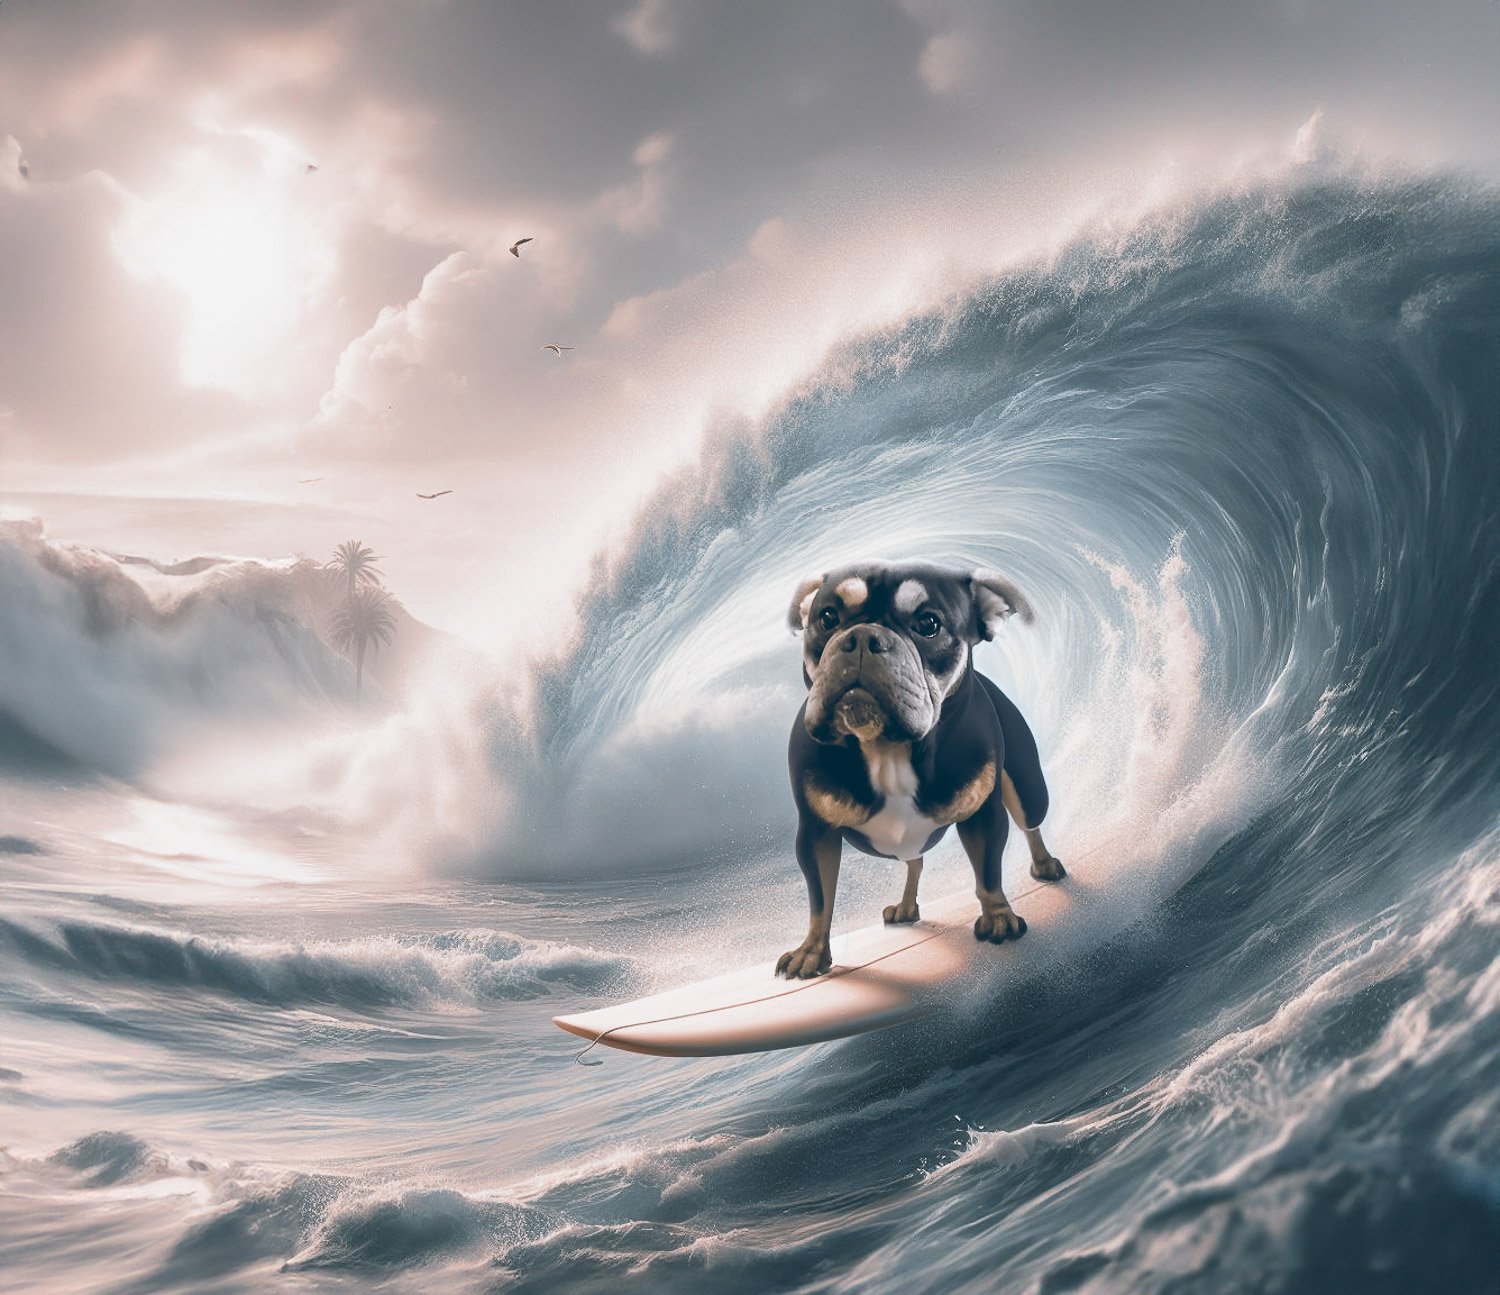 A black and white dog riding a large wave on a surfboard 